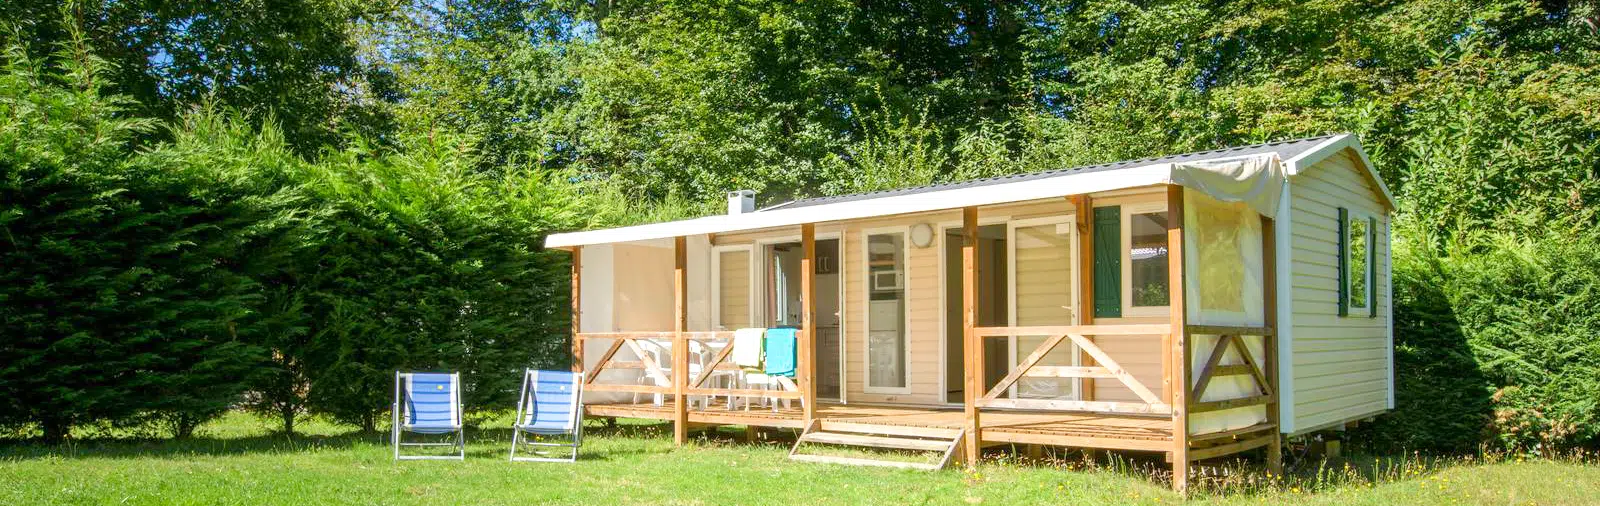 camping le coiroux location